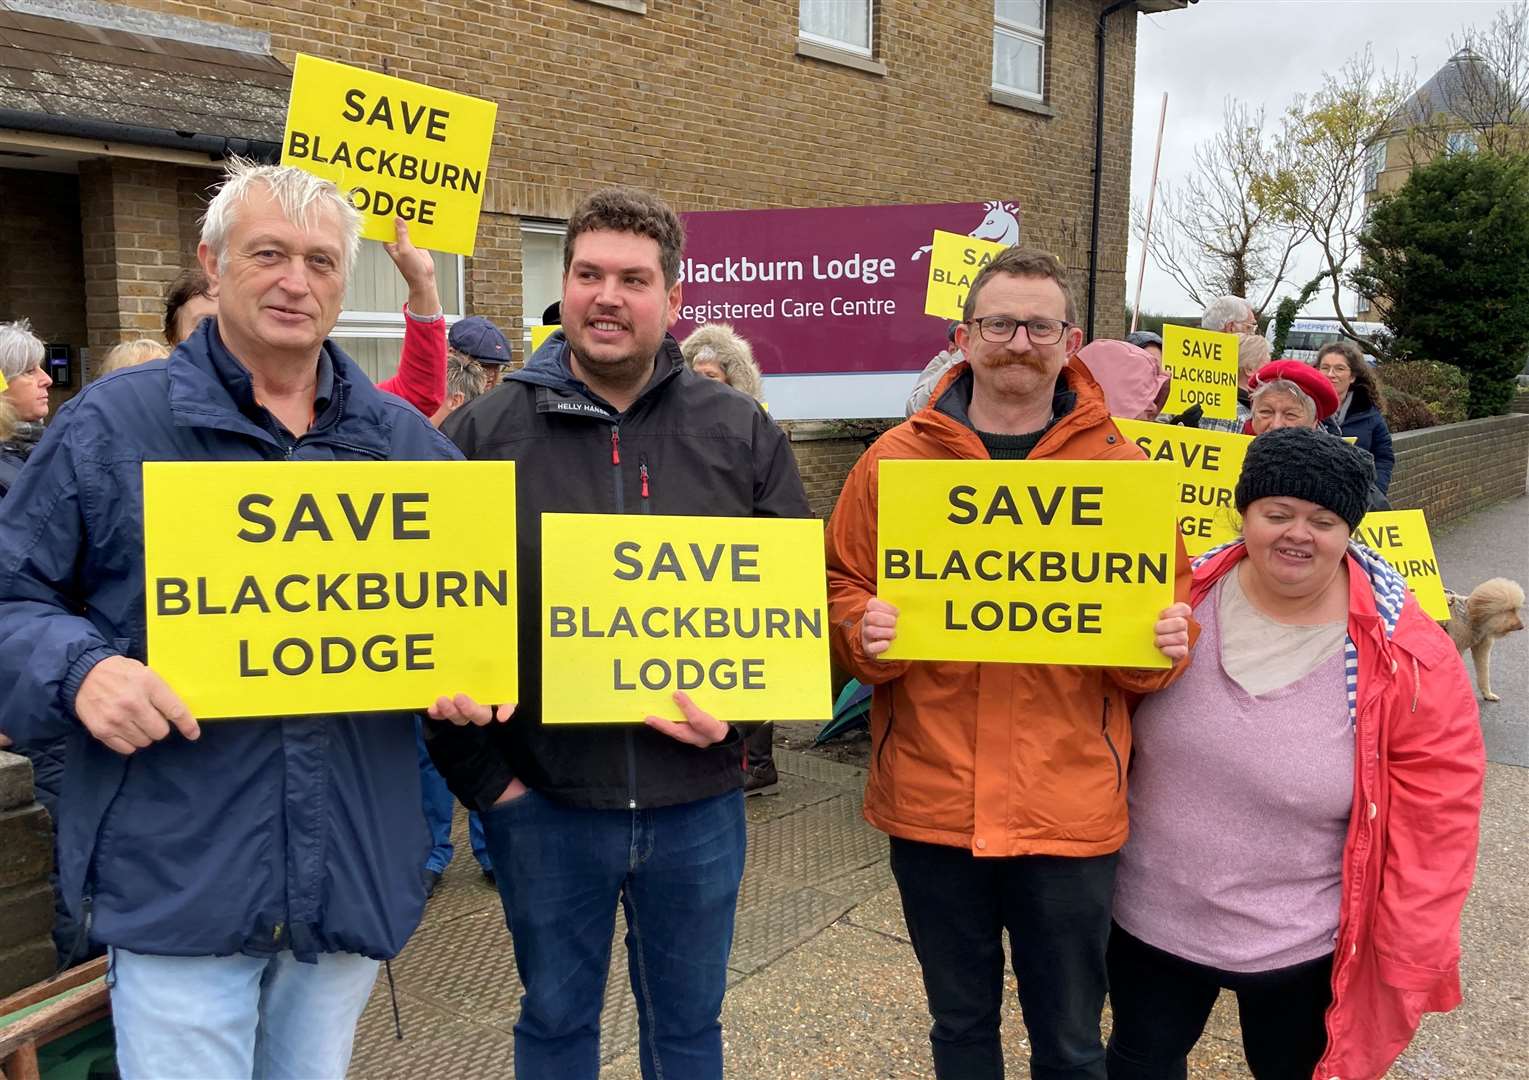 Councillors joined the protests outside Blackburn Lodge in Sheerness last year